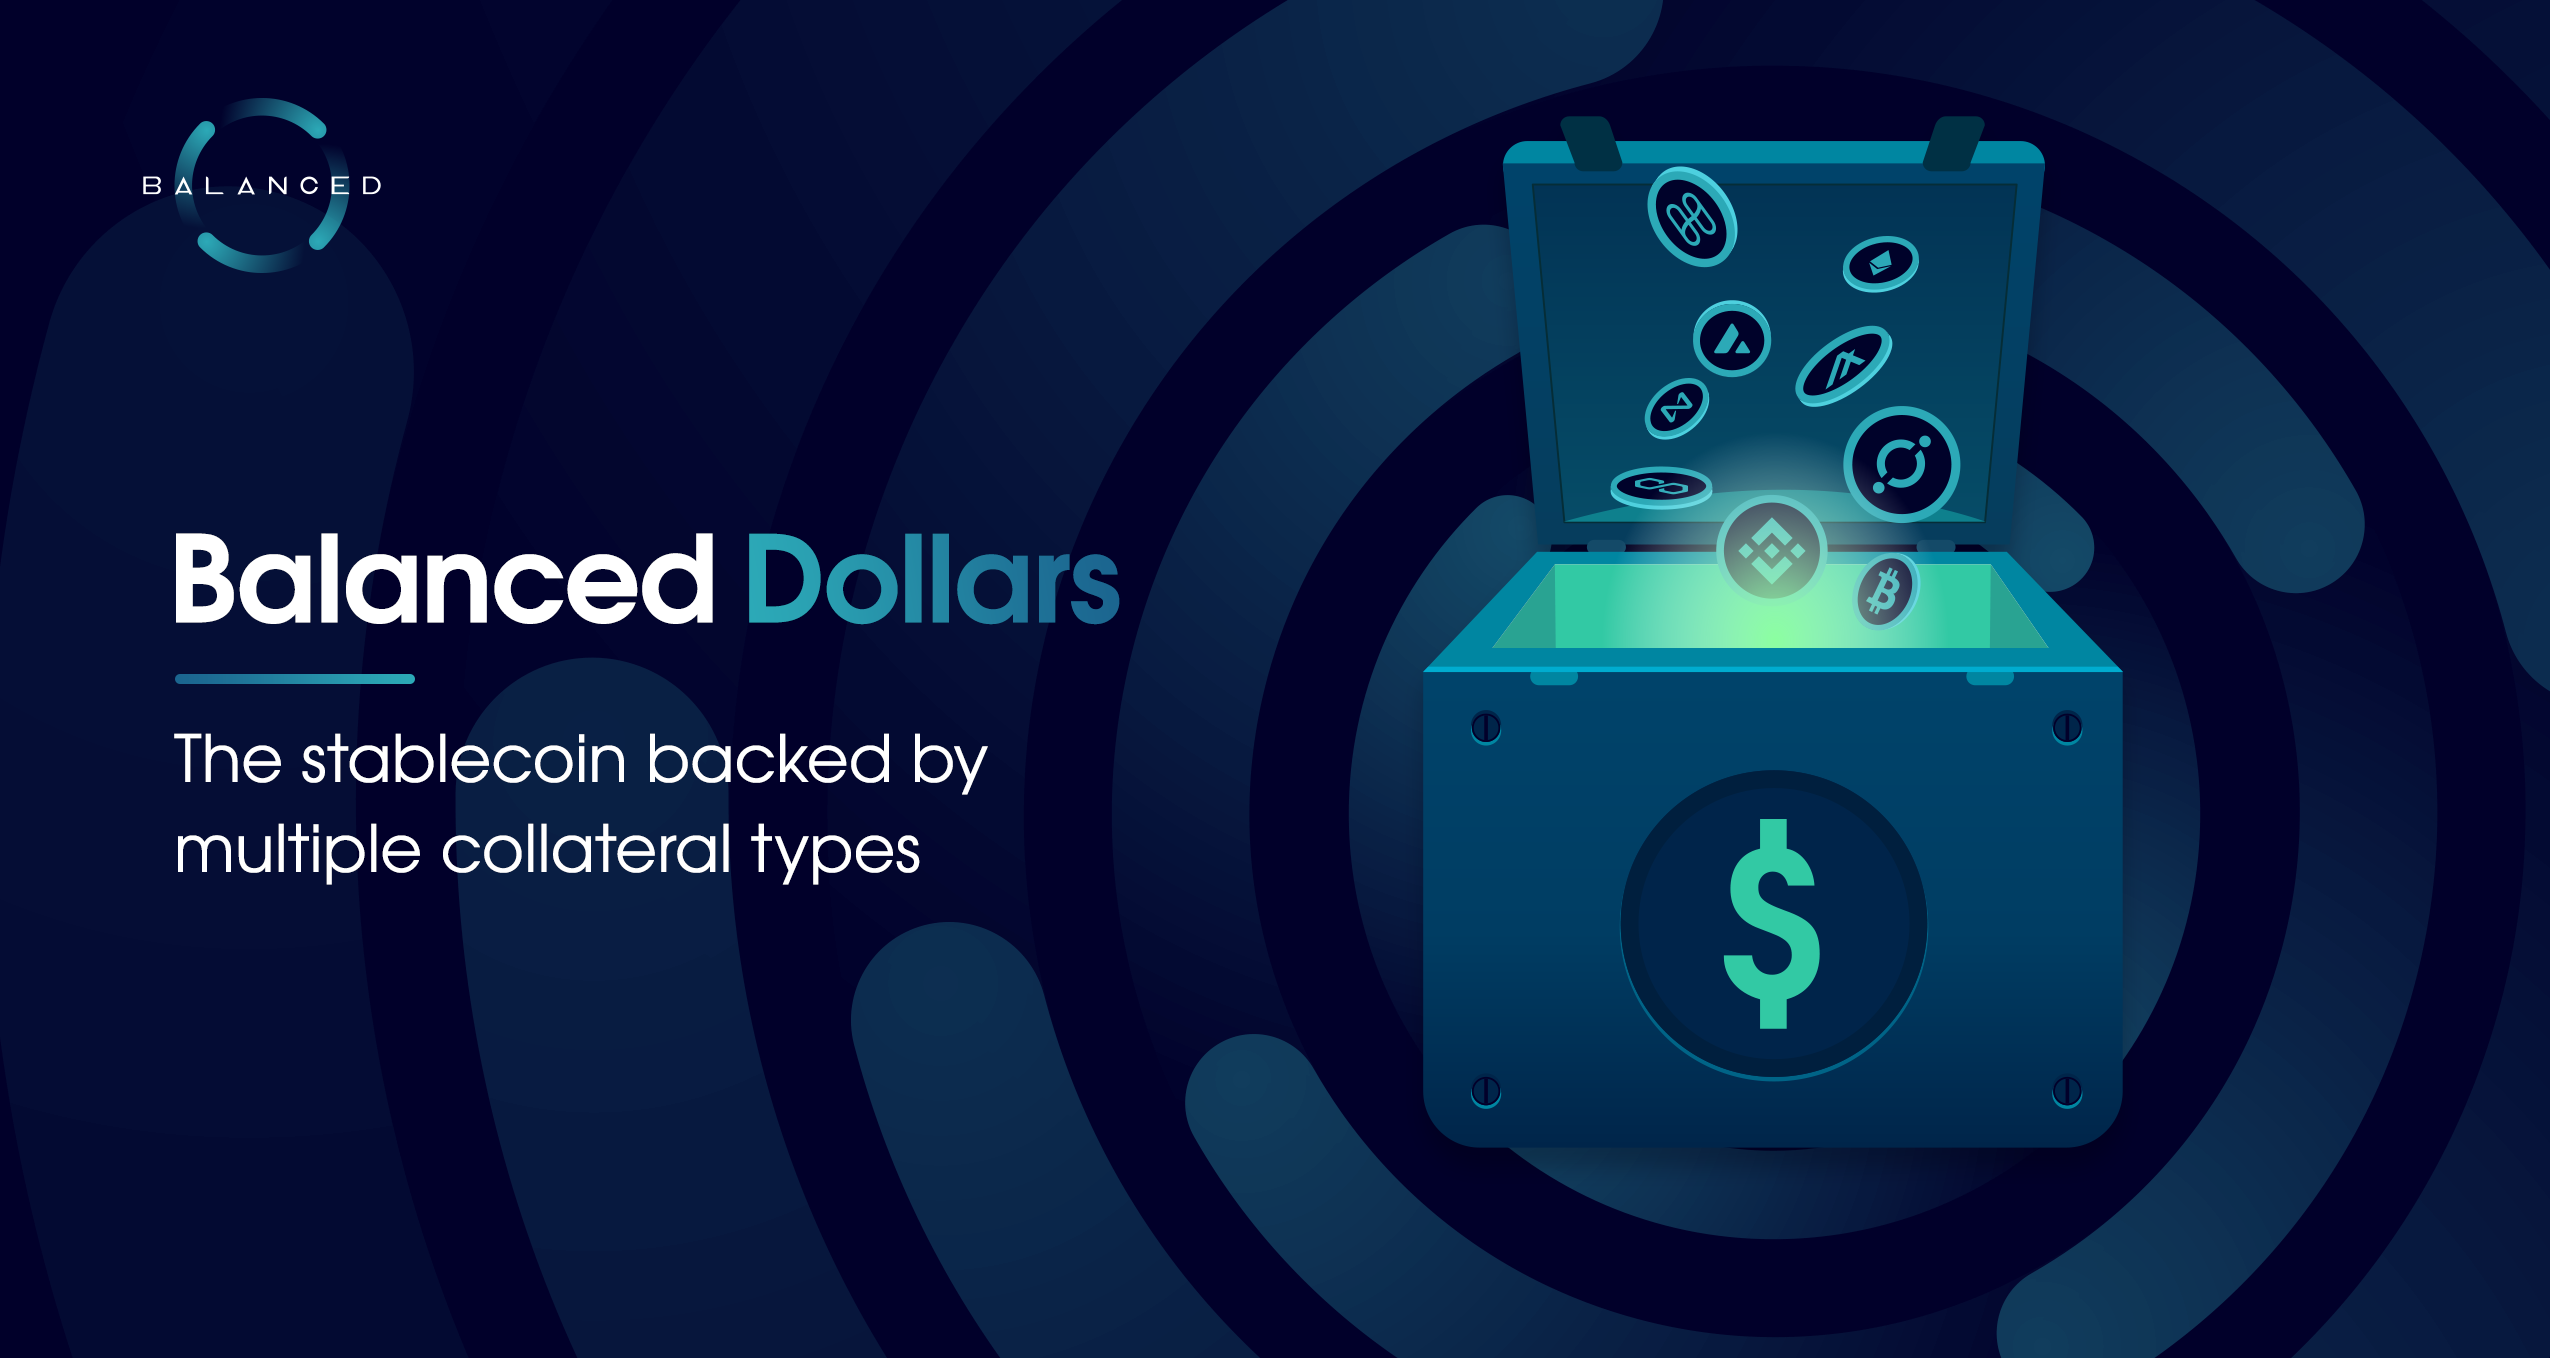 Balanced Dollars: The stablecoin backed by multiple collateral types